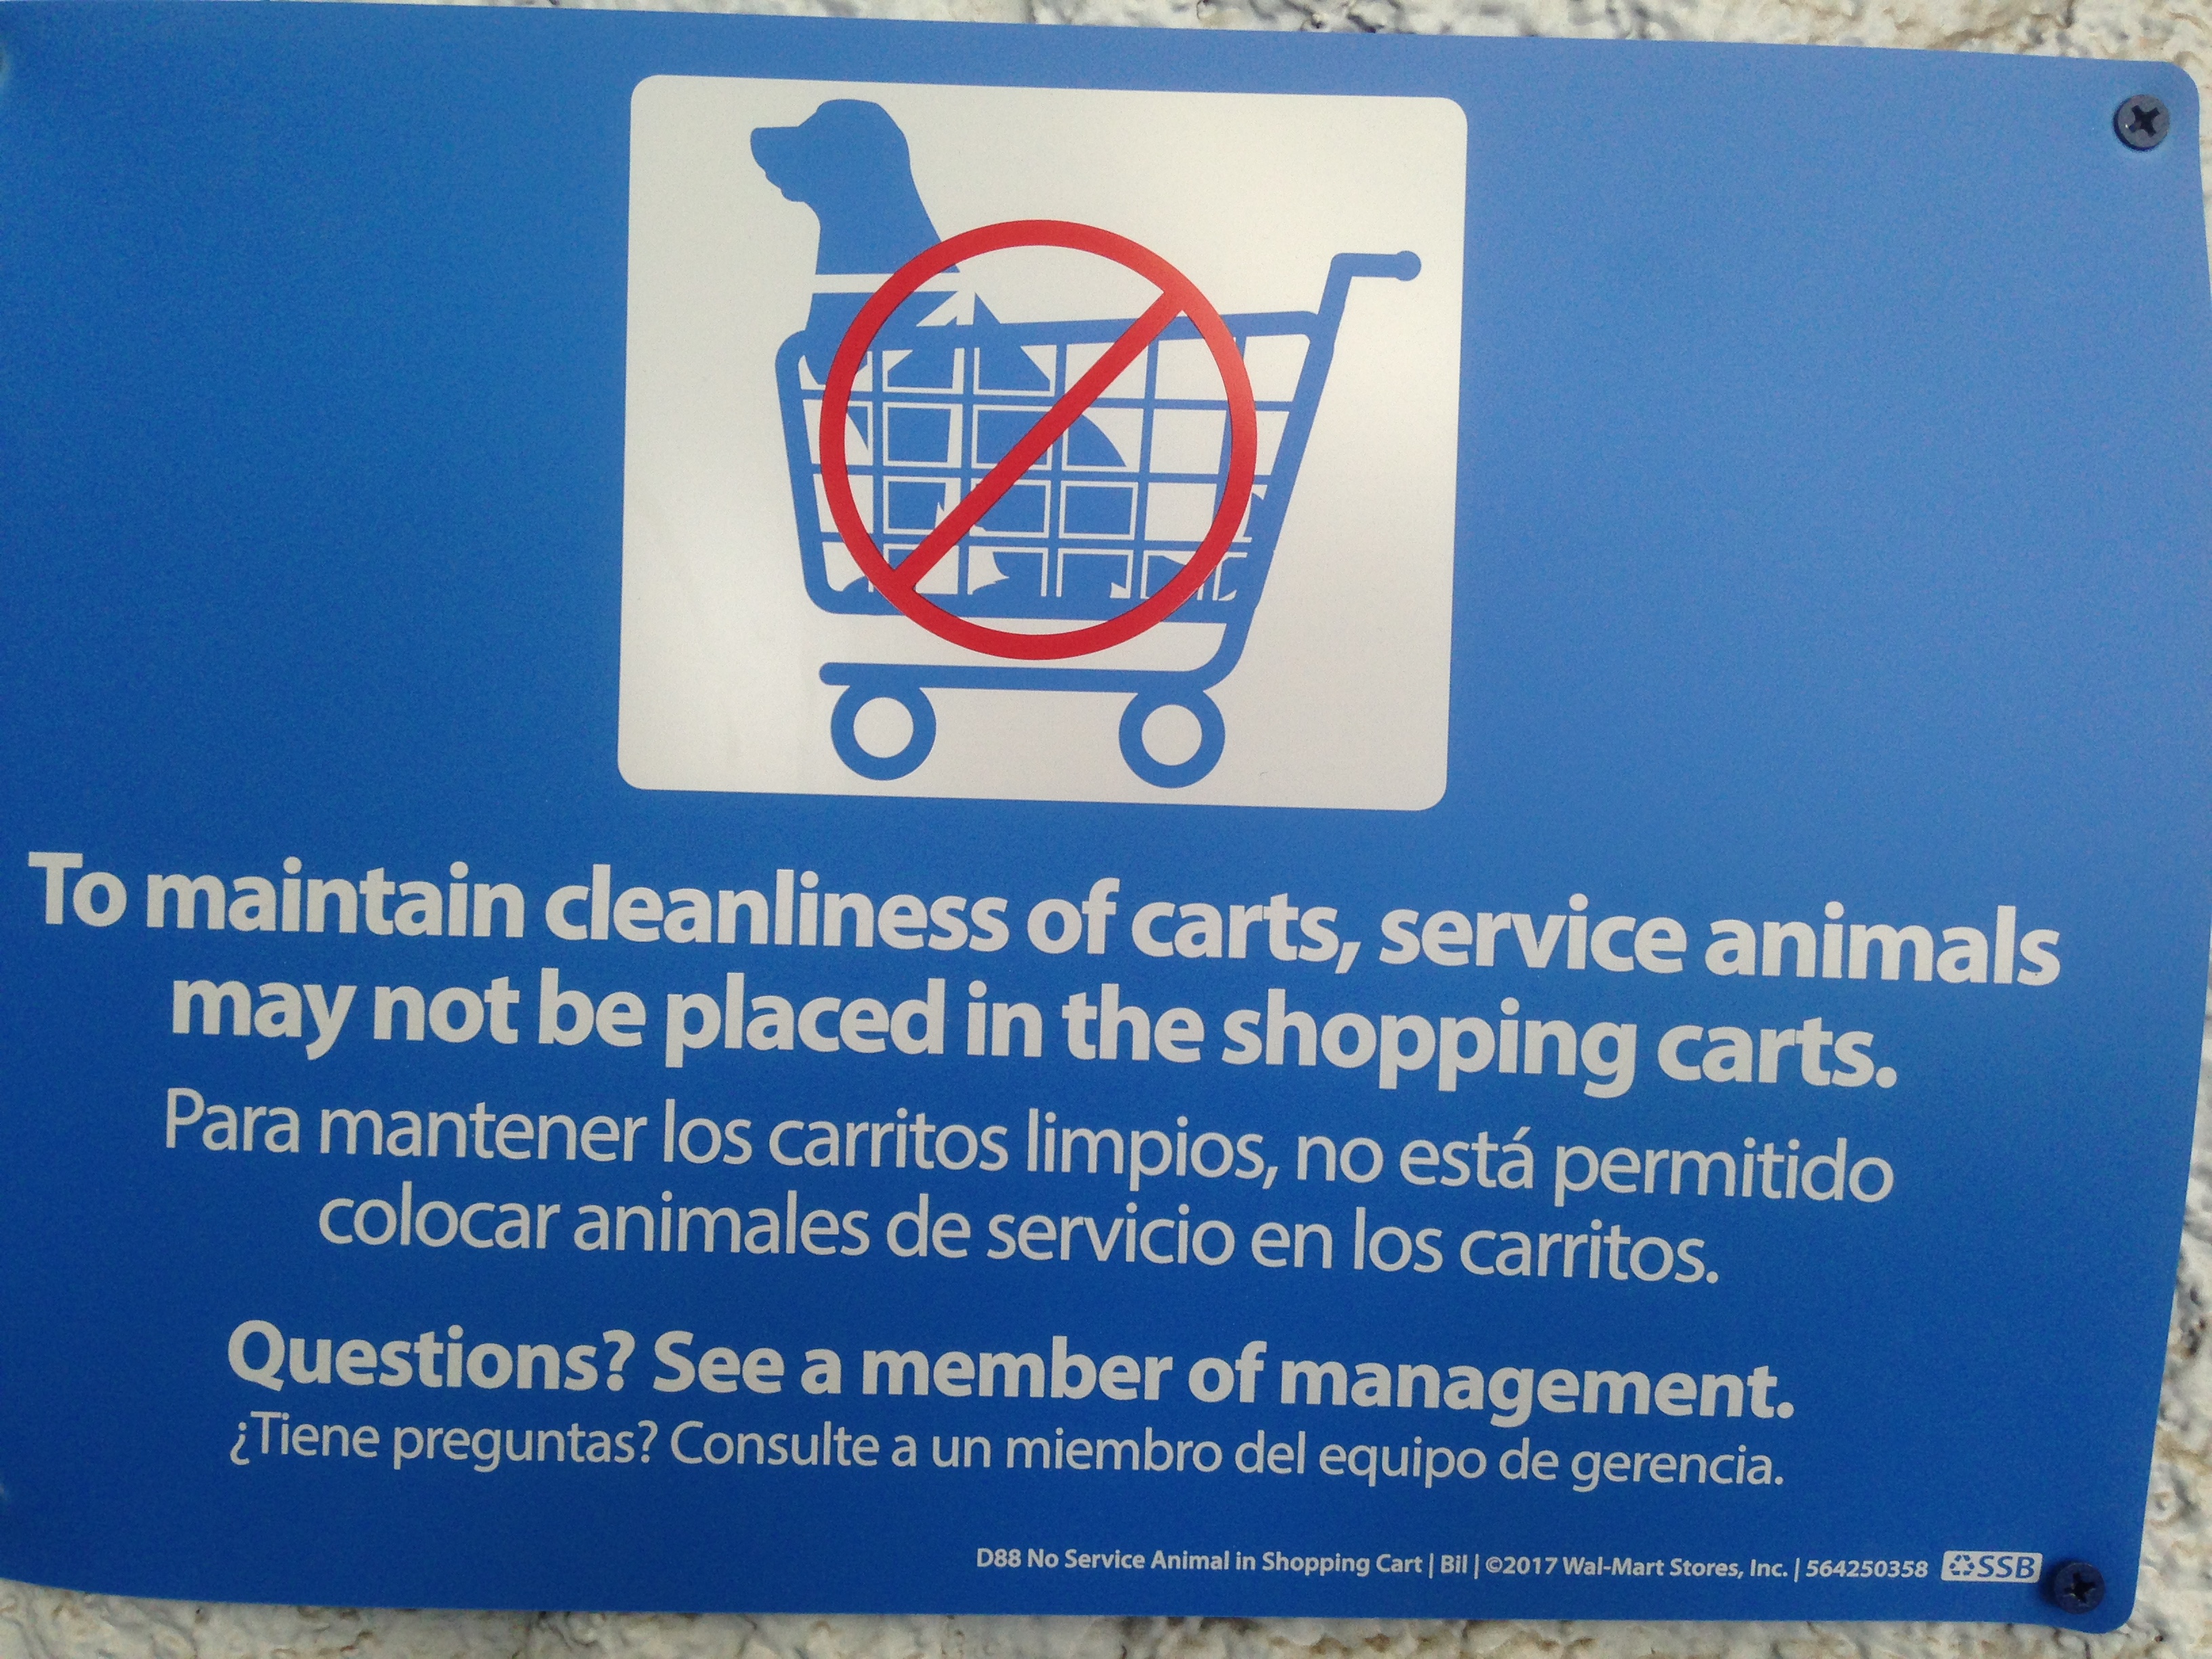 A line illustration of a dog sitting in a shopping cart facing forward, with the red “no” symbol over it. Beneath the subtext in English and Spanish reads: To maintain cleanliness of carts, service animals may not be placed in the shopping carts. / Questions? See a member of management.